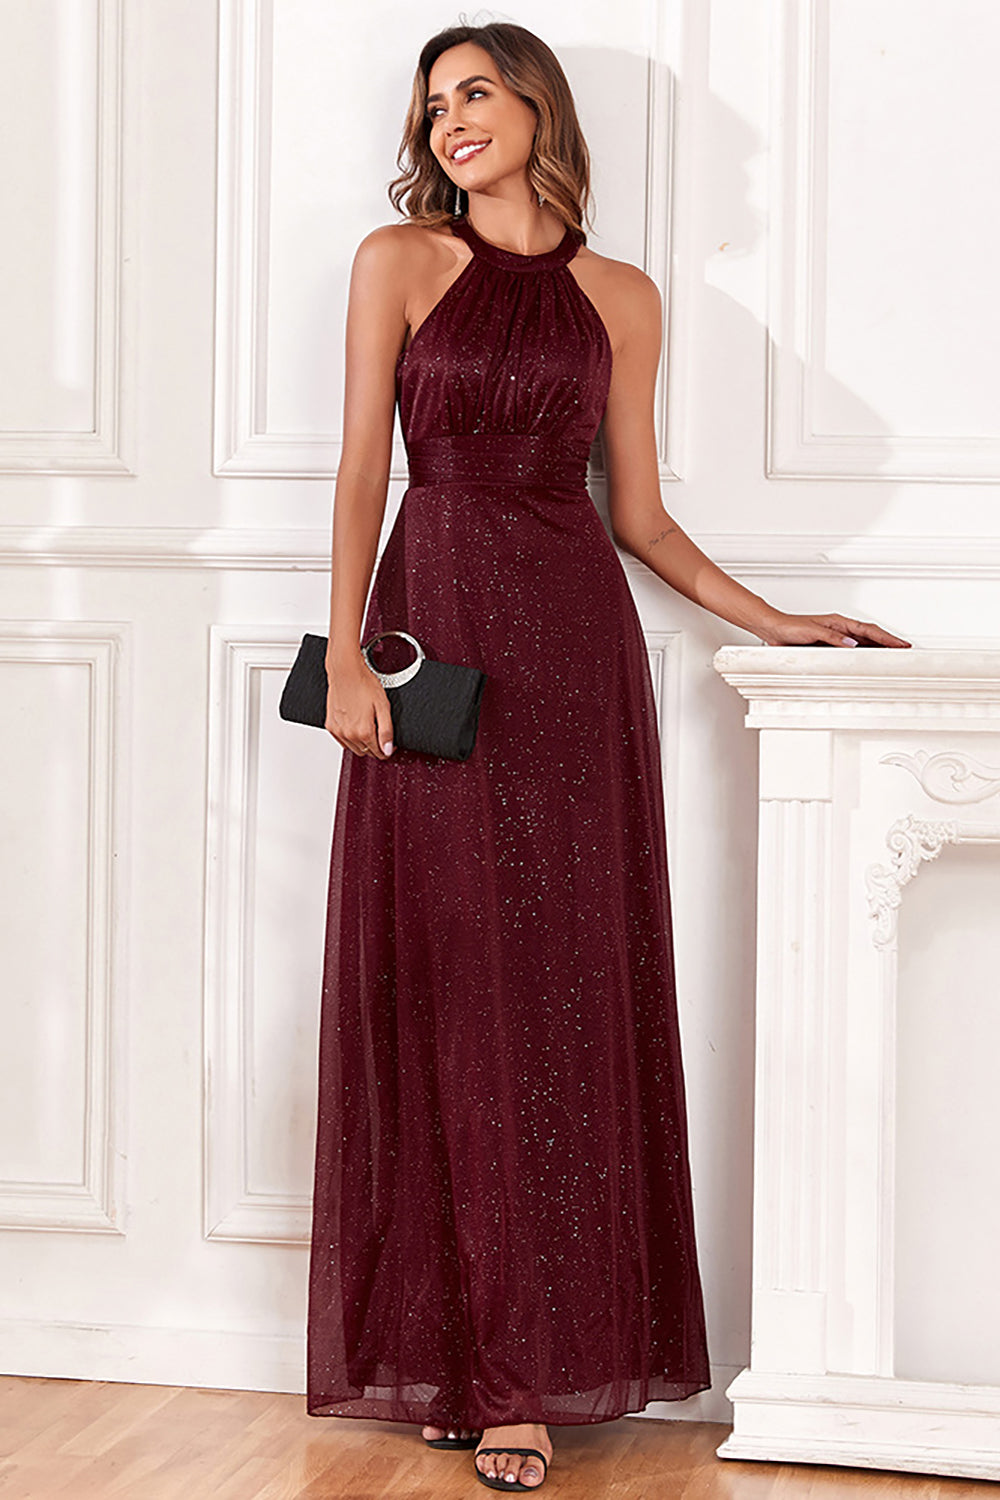 Sparkly Halter Burgundy Holiday Party Dress with Open Back